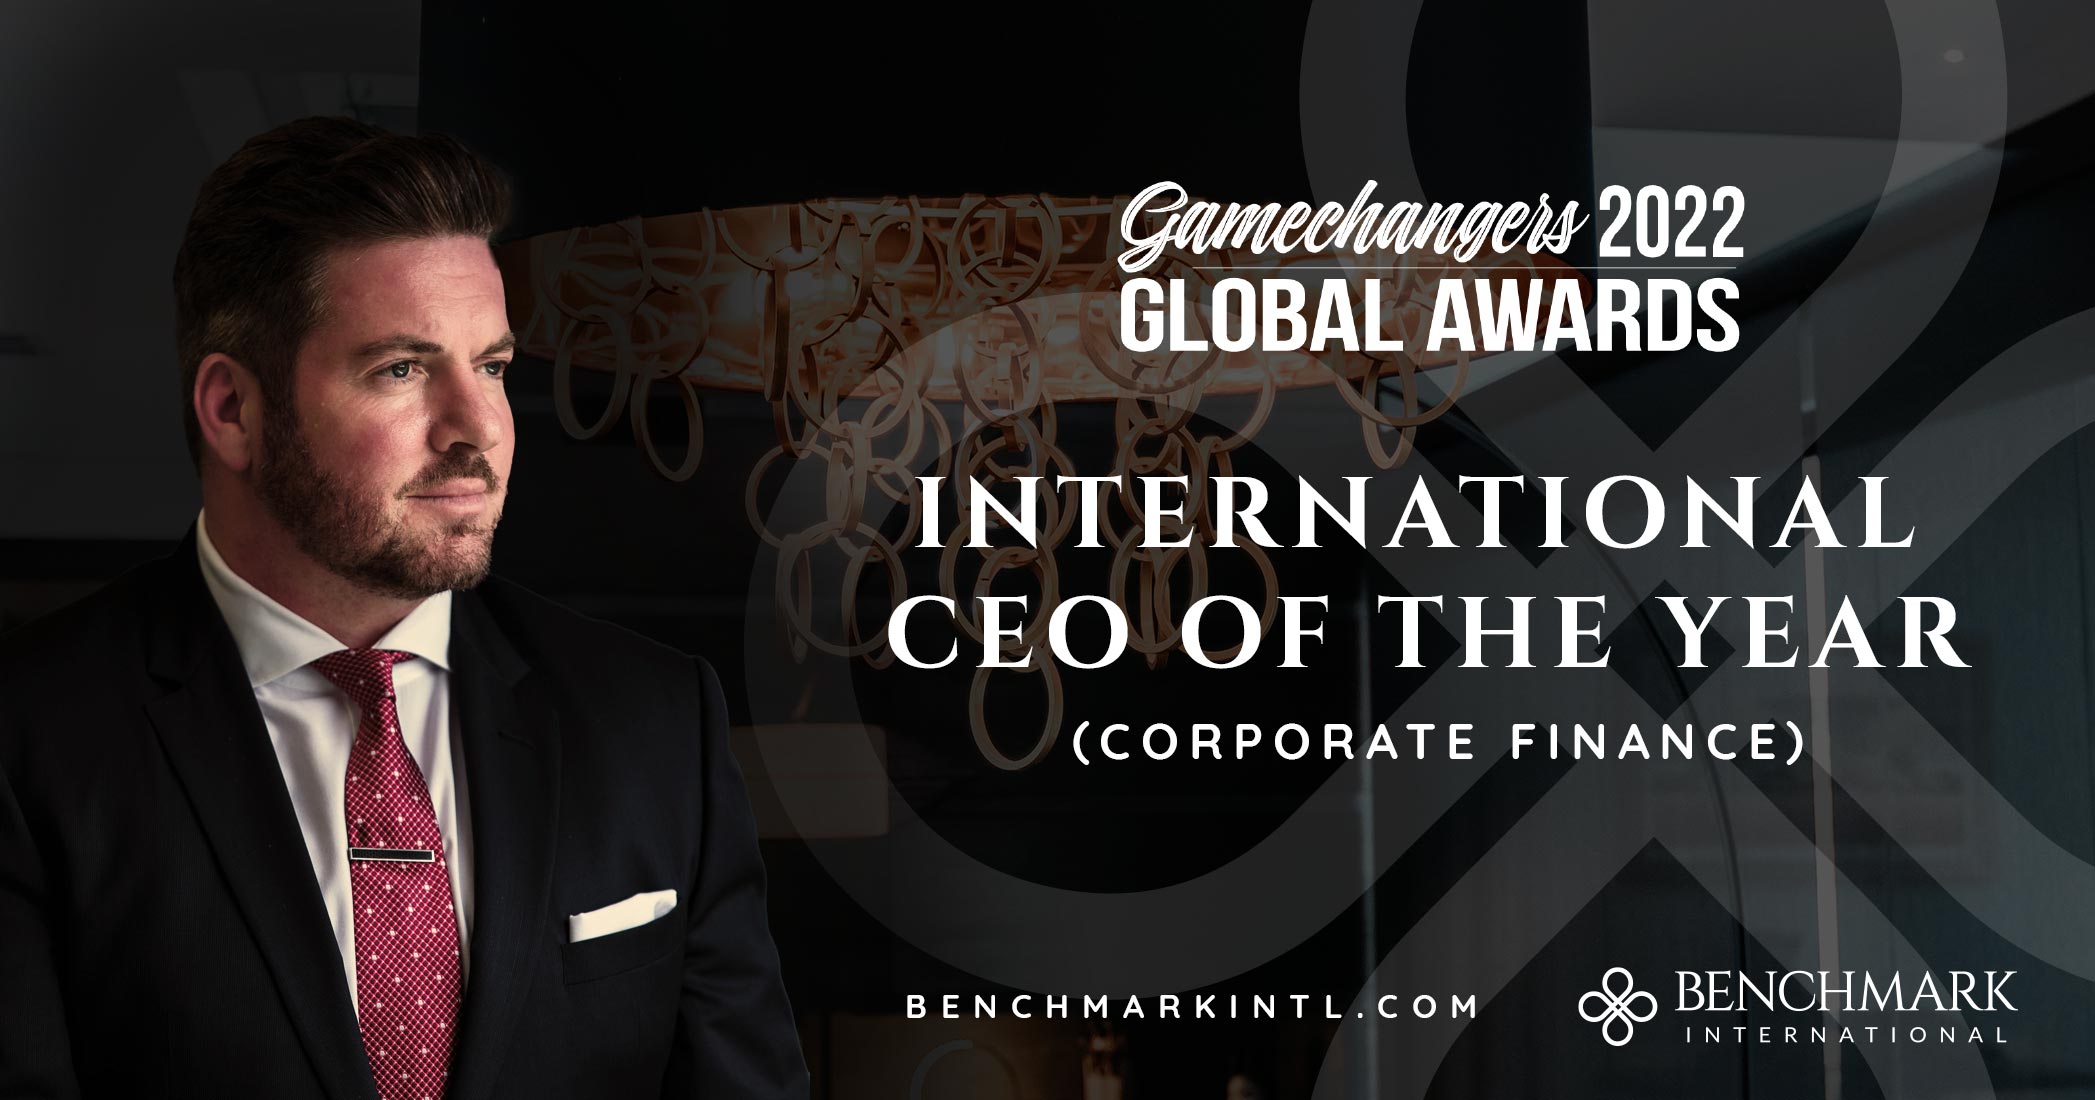 Benchmark International’s Gregory Jackson Named International Ceo Of The Year (Corporate Finance)